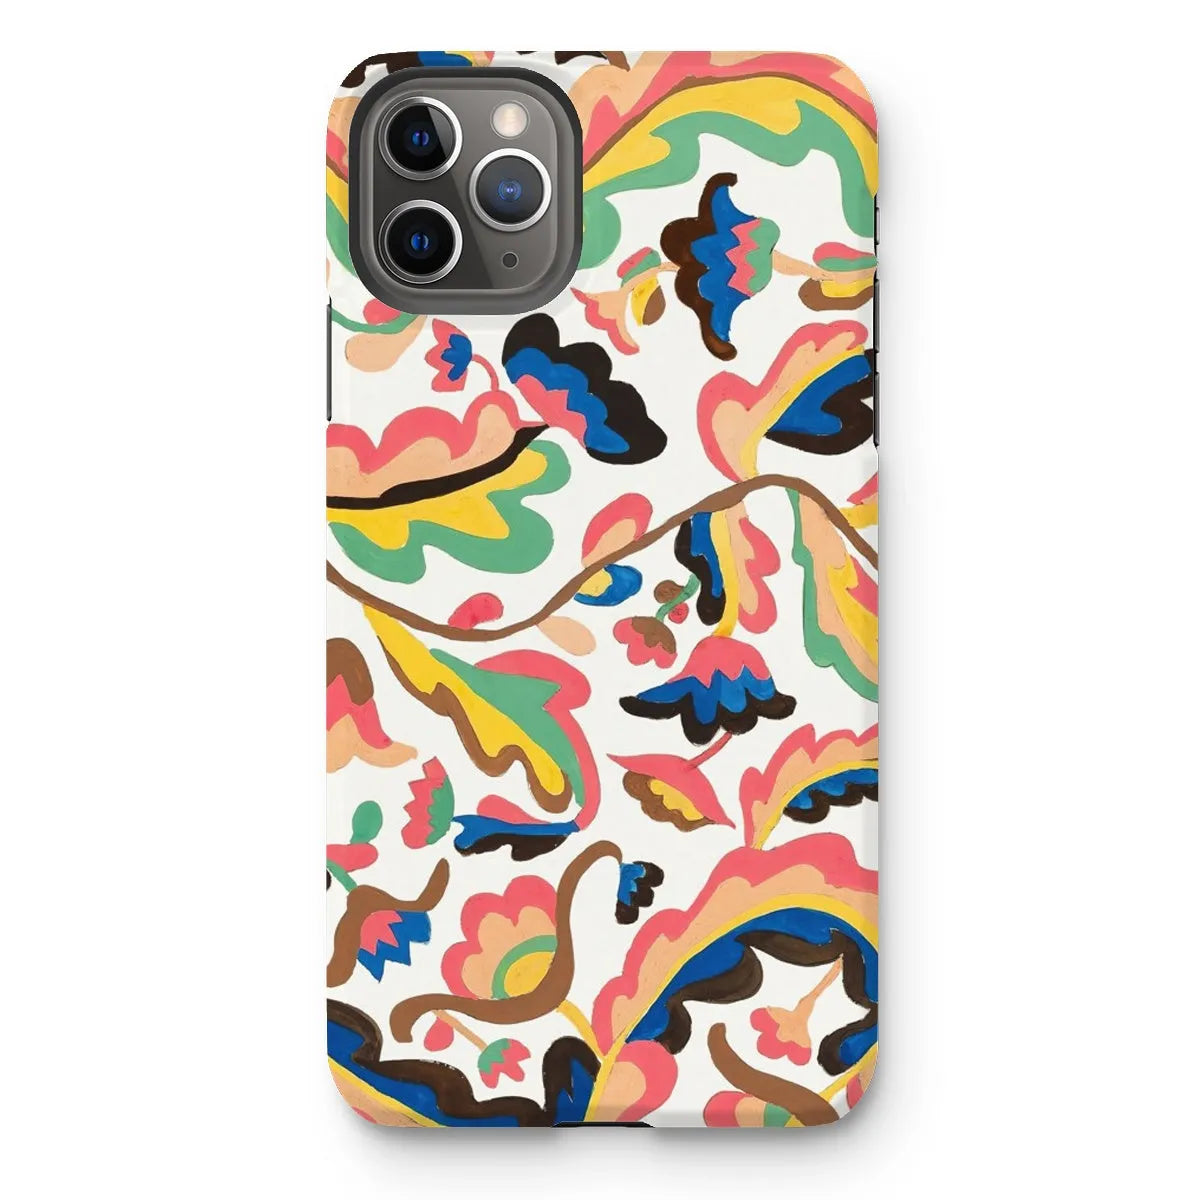 Colcha Floral Aesthetic Pattern Phone Case - Etna Wiswall - Iphone 11 Pro Max / Matte - Mobile Phone Cases - Aesthetic